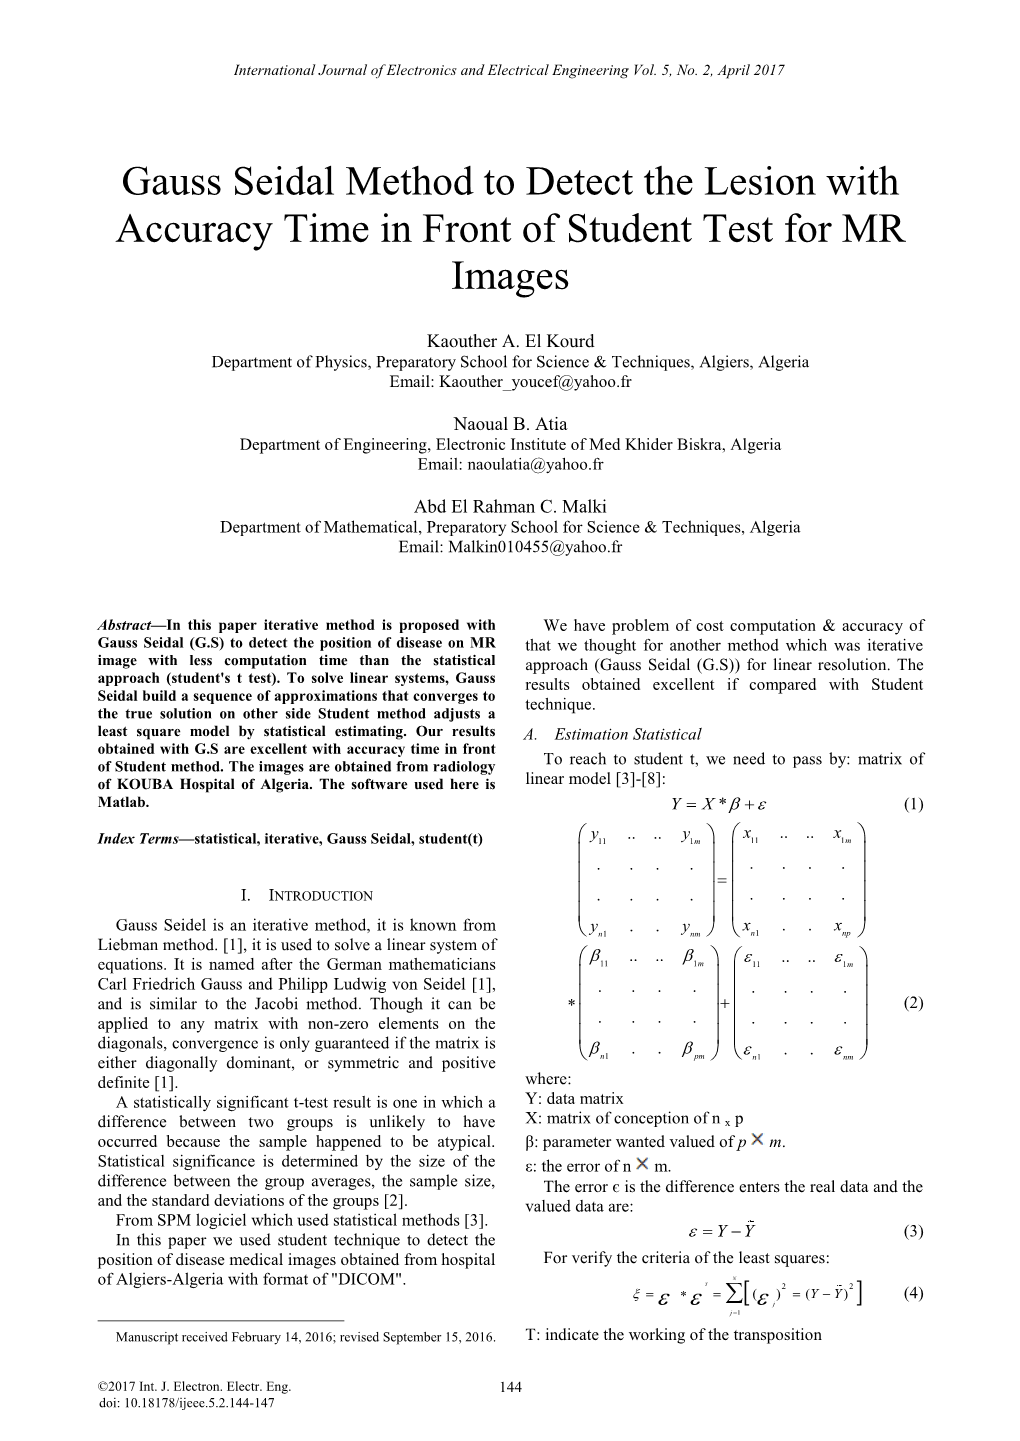 Gauss Seidal Method to Detect the Lesion with Accuracy Time in Front of Student Test for MR Images